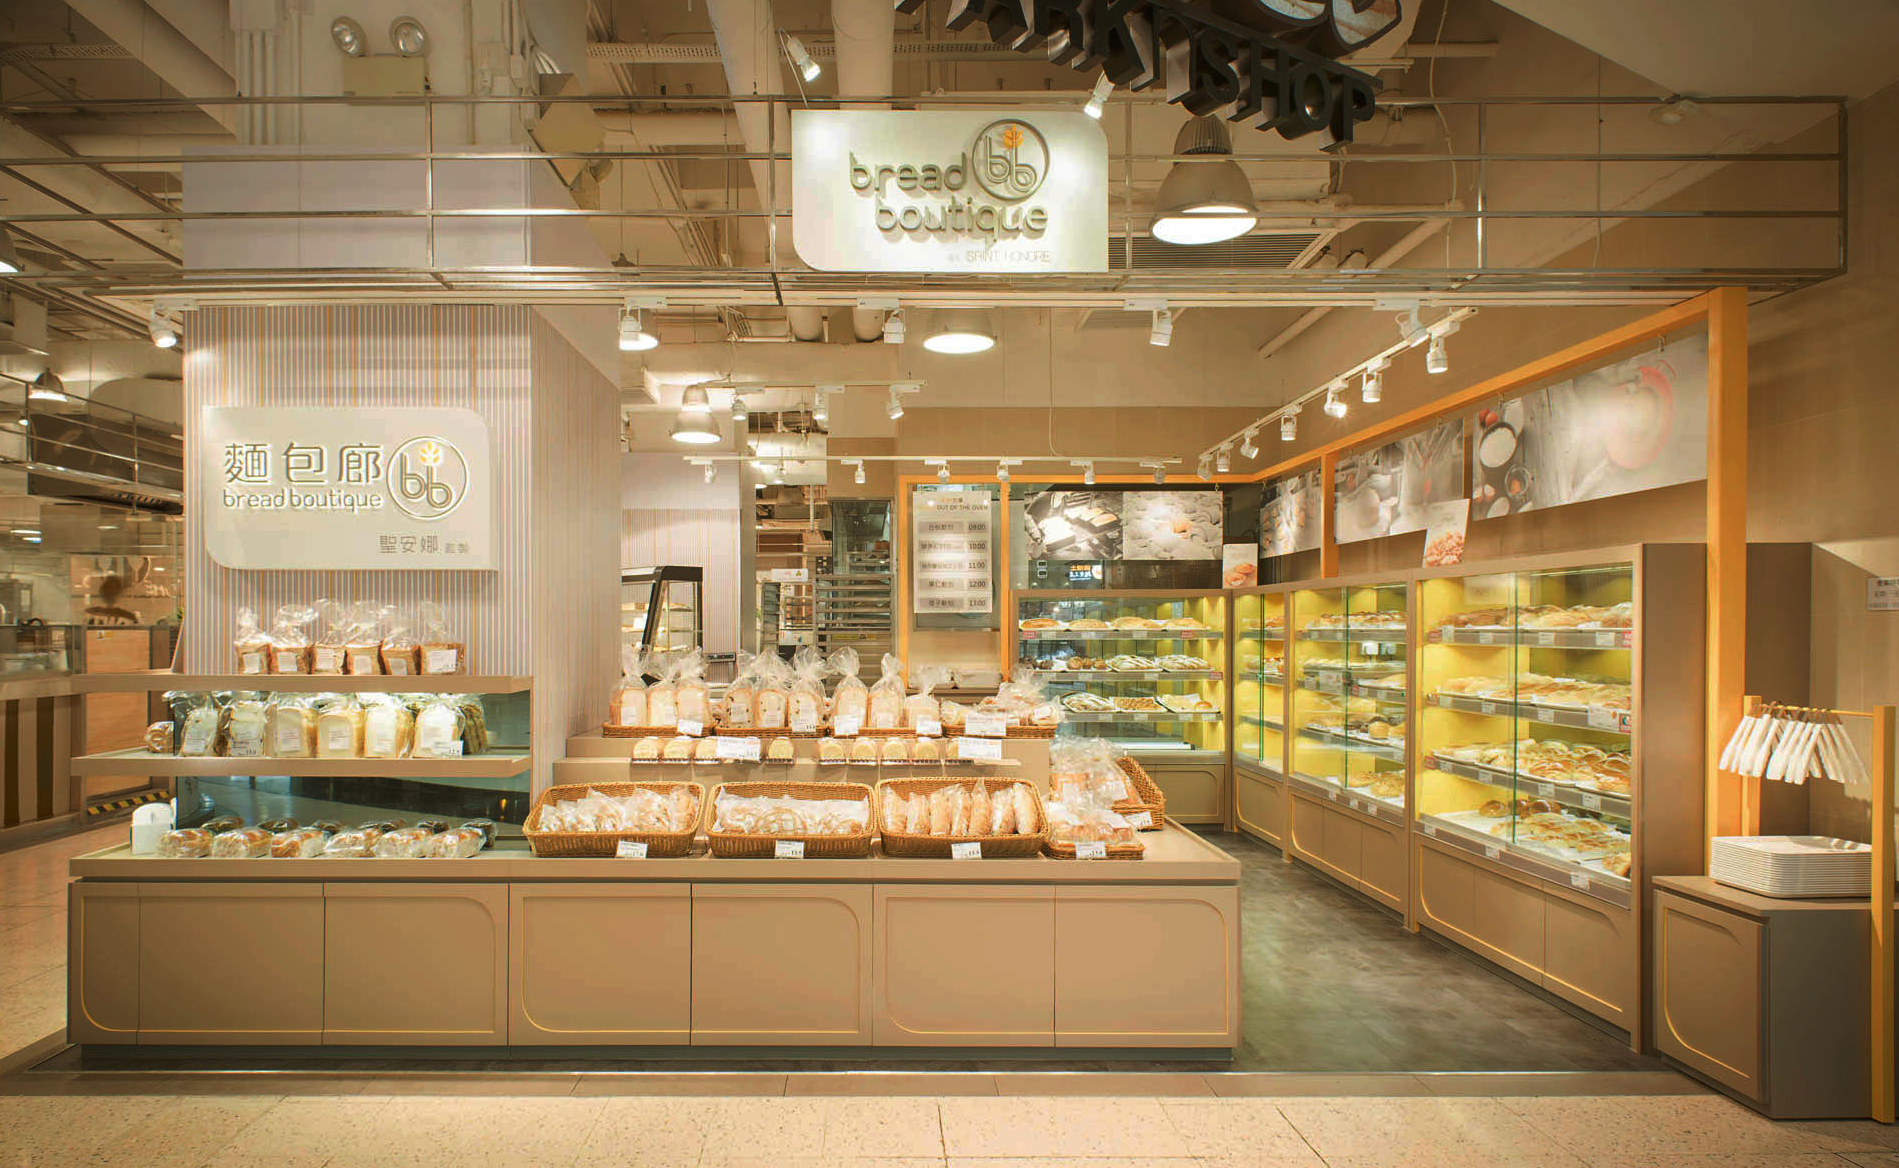 Bread Boutique by Saint Honore Hong Kong Store Signage, Graphic and New Interior Concept Design by Plaap Design